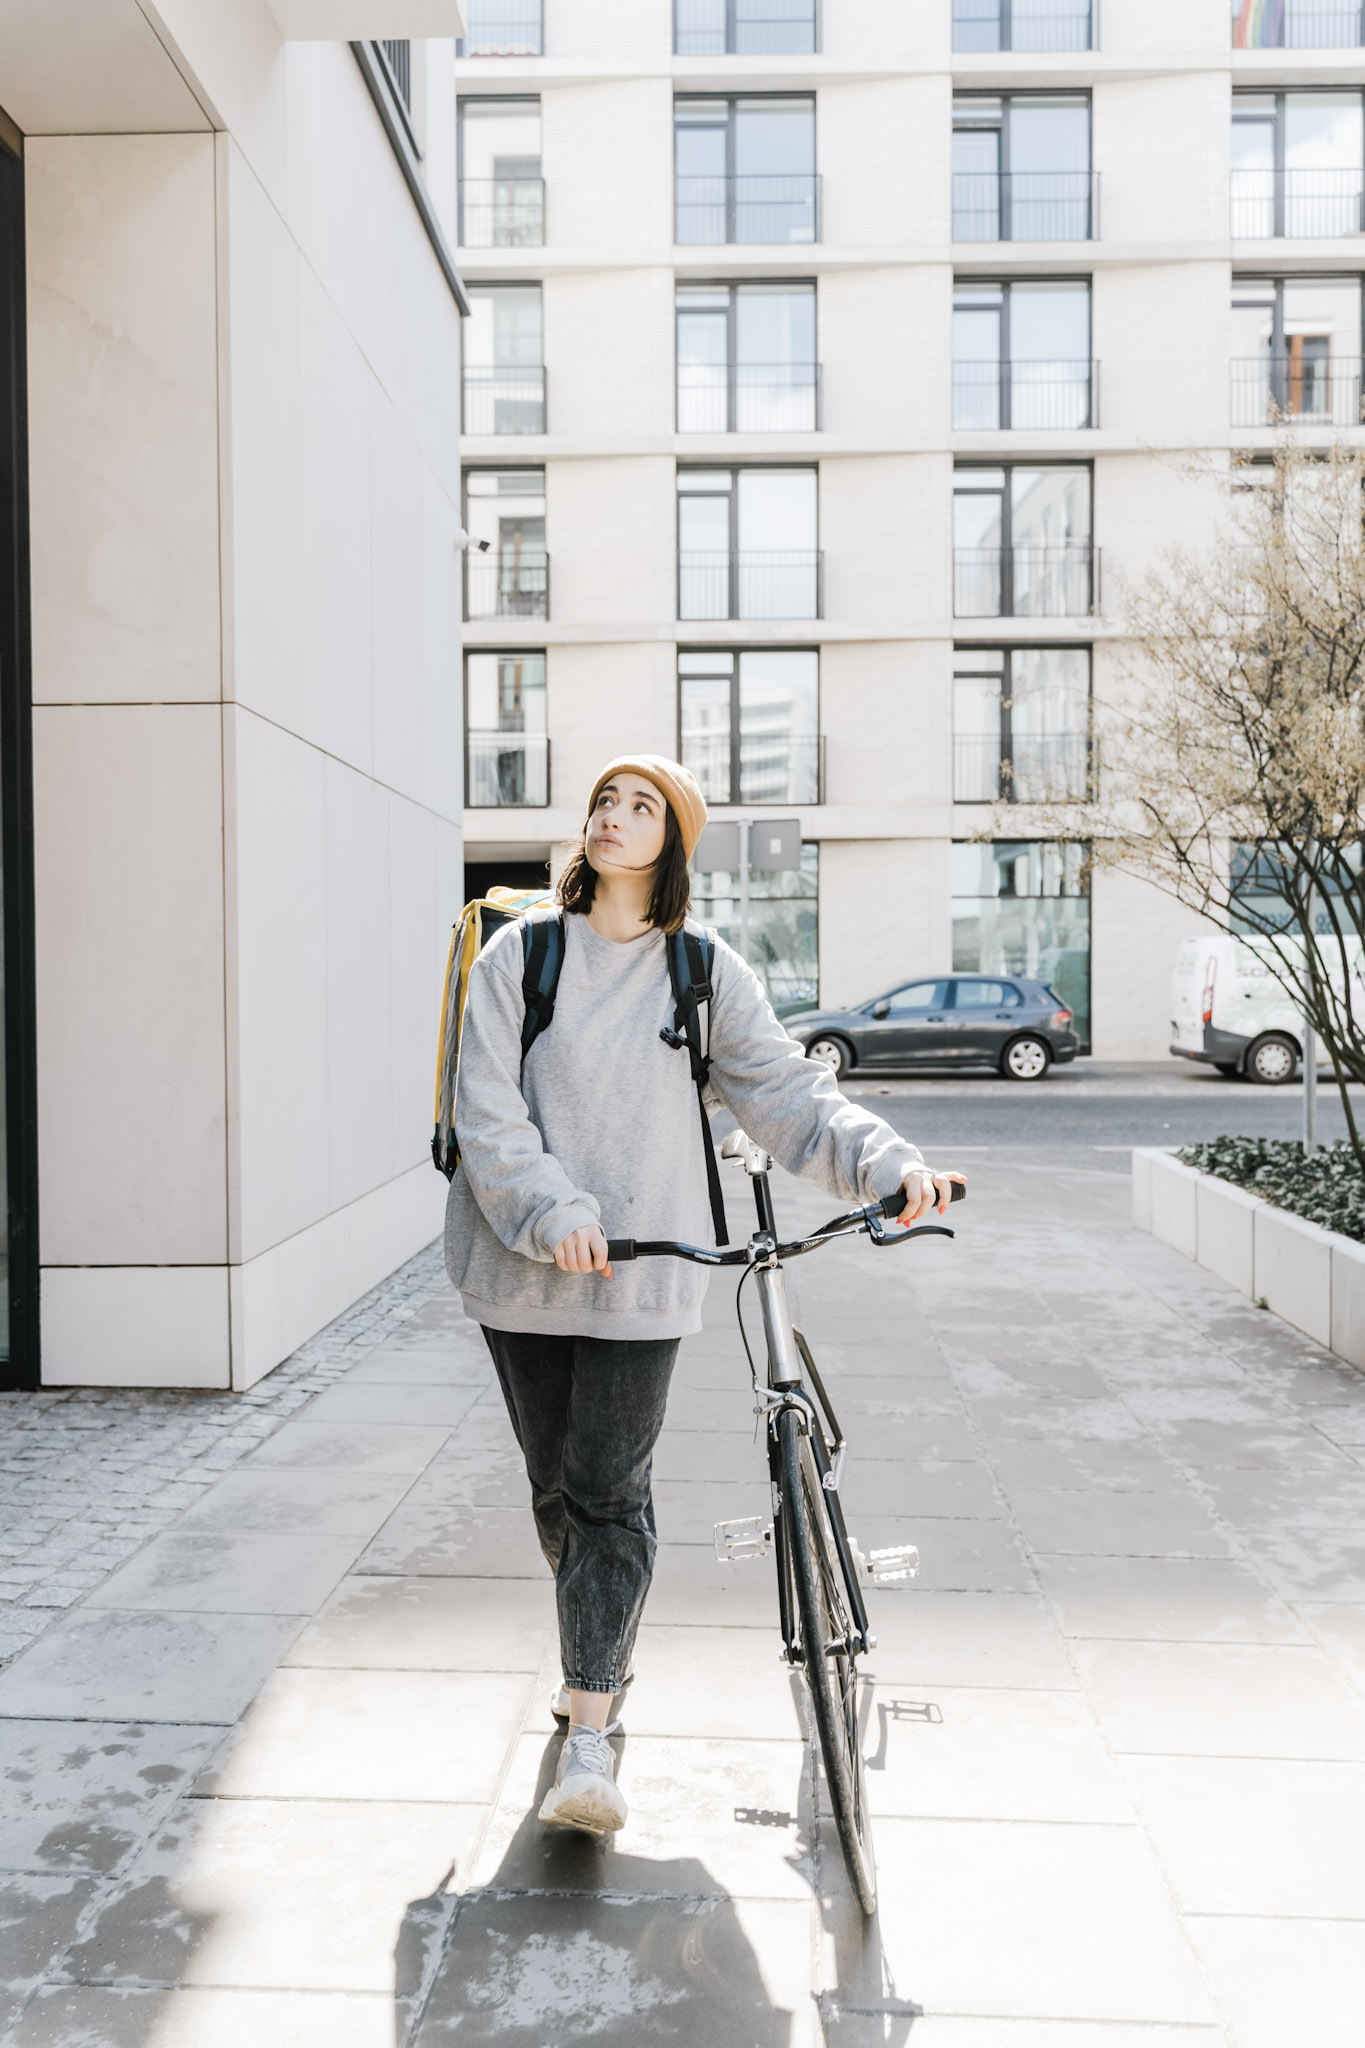 A girl casually walks through buildings while pushing a bicycle. The girl is looking up. This article covers 4 essential safety tips when riding a bicycle.